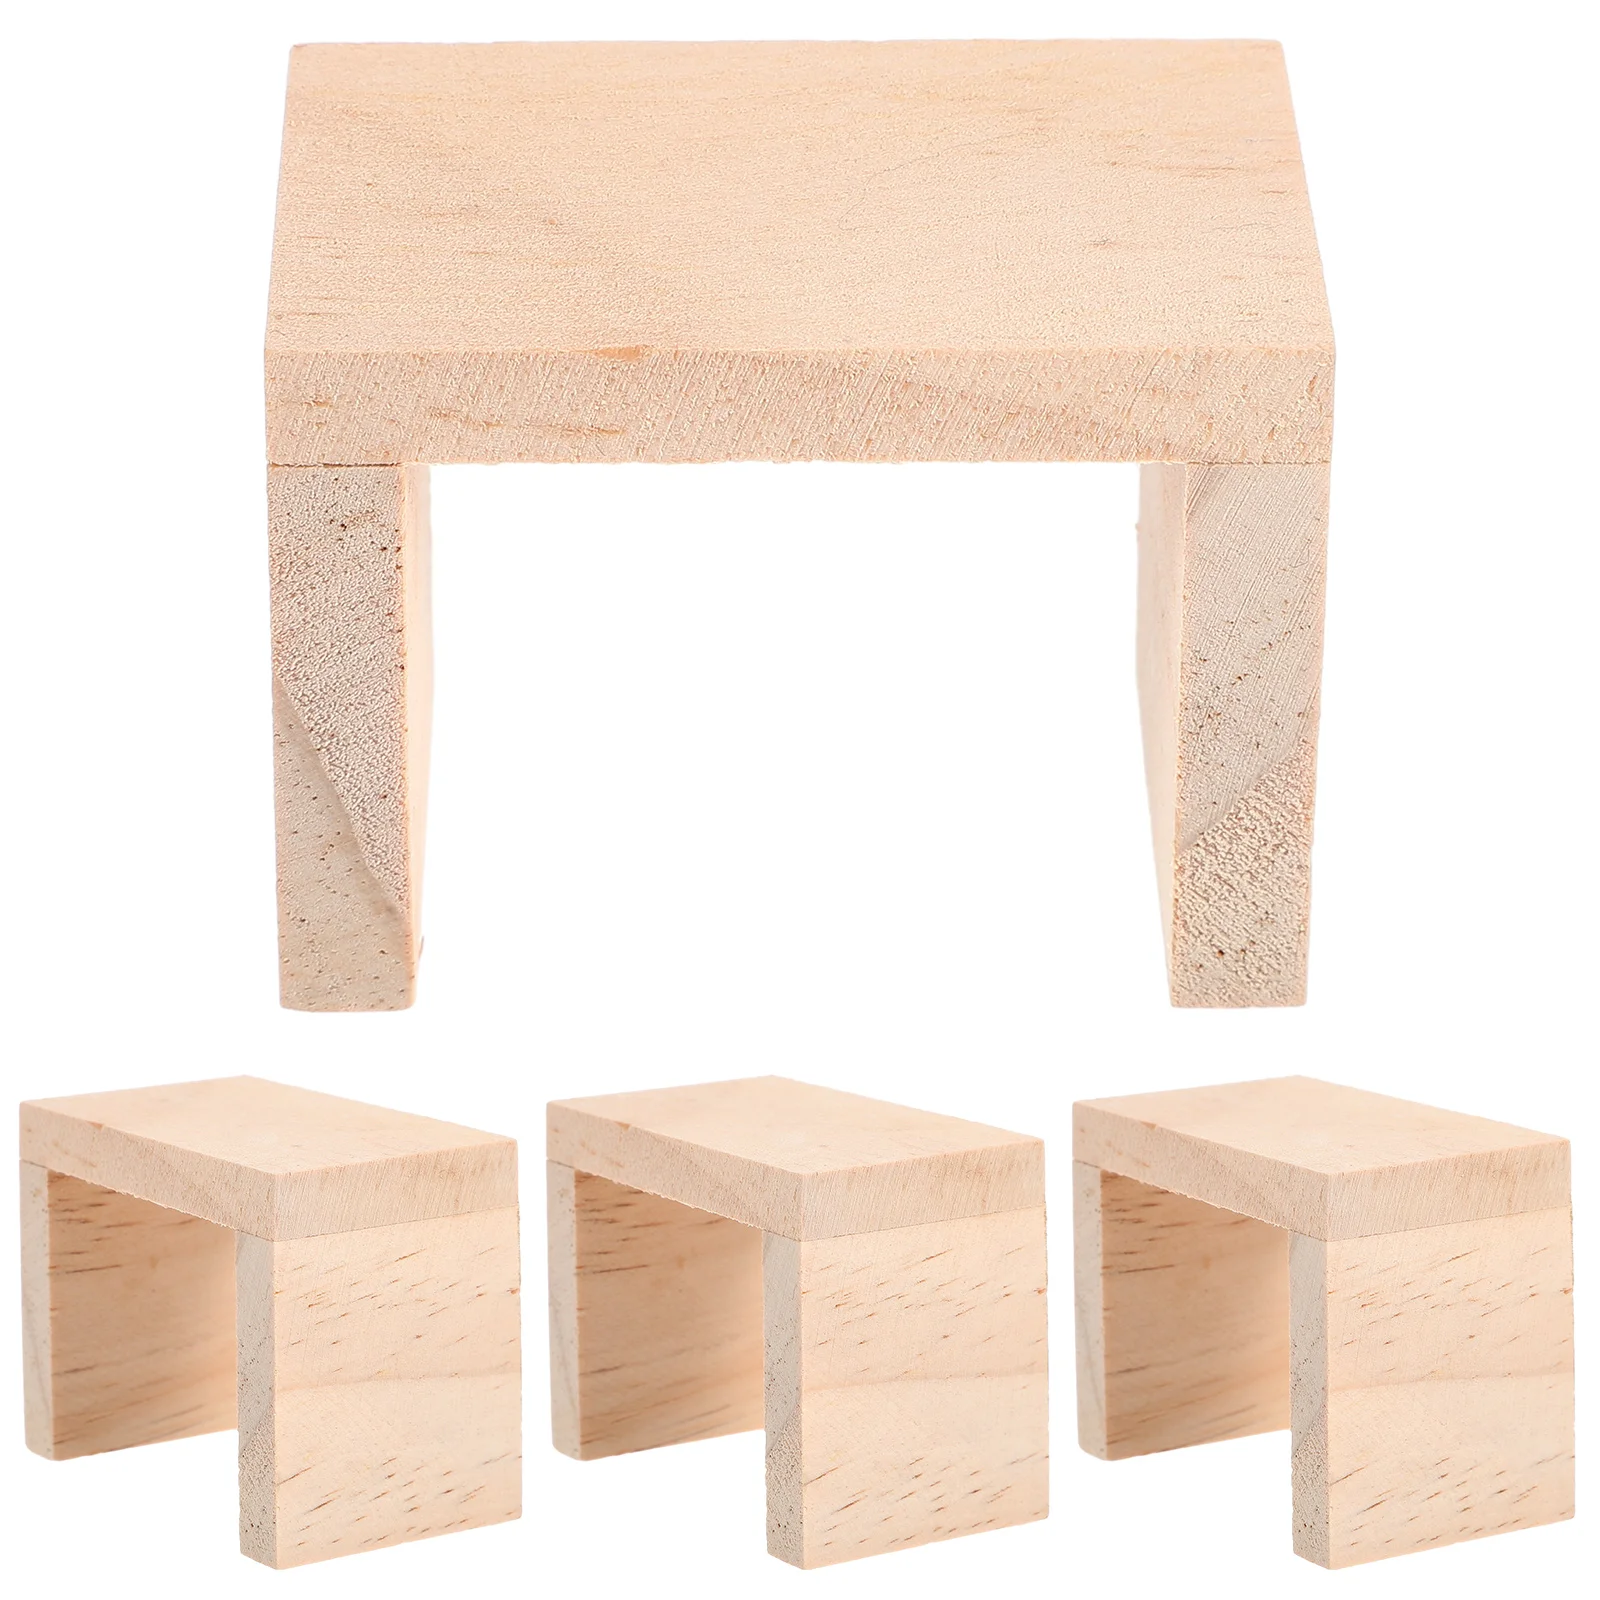 

4 Pcs Dollhouse Stool Model Accessories Toy Room Miniature Furniture Wood Wooden Layout Prop Decors